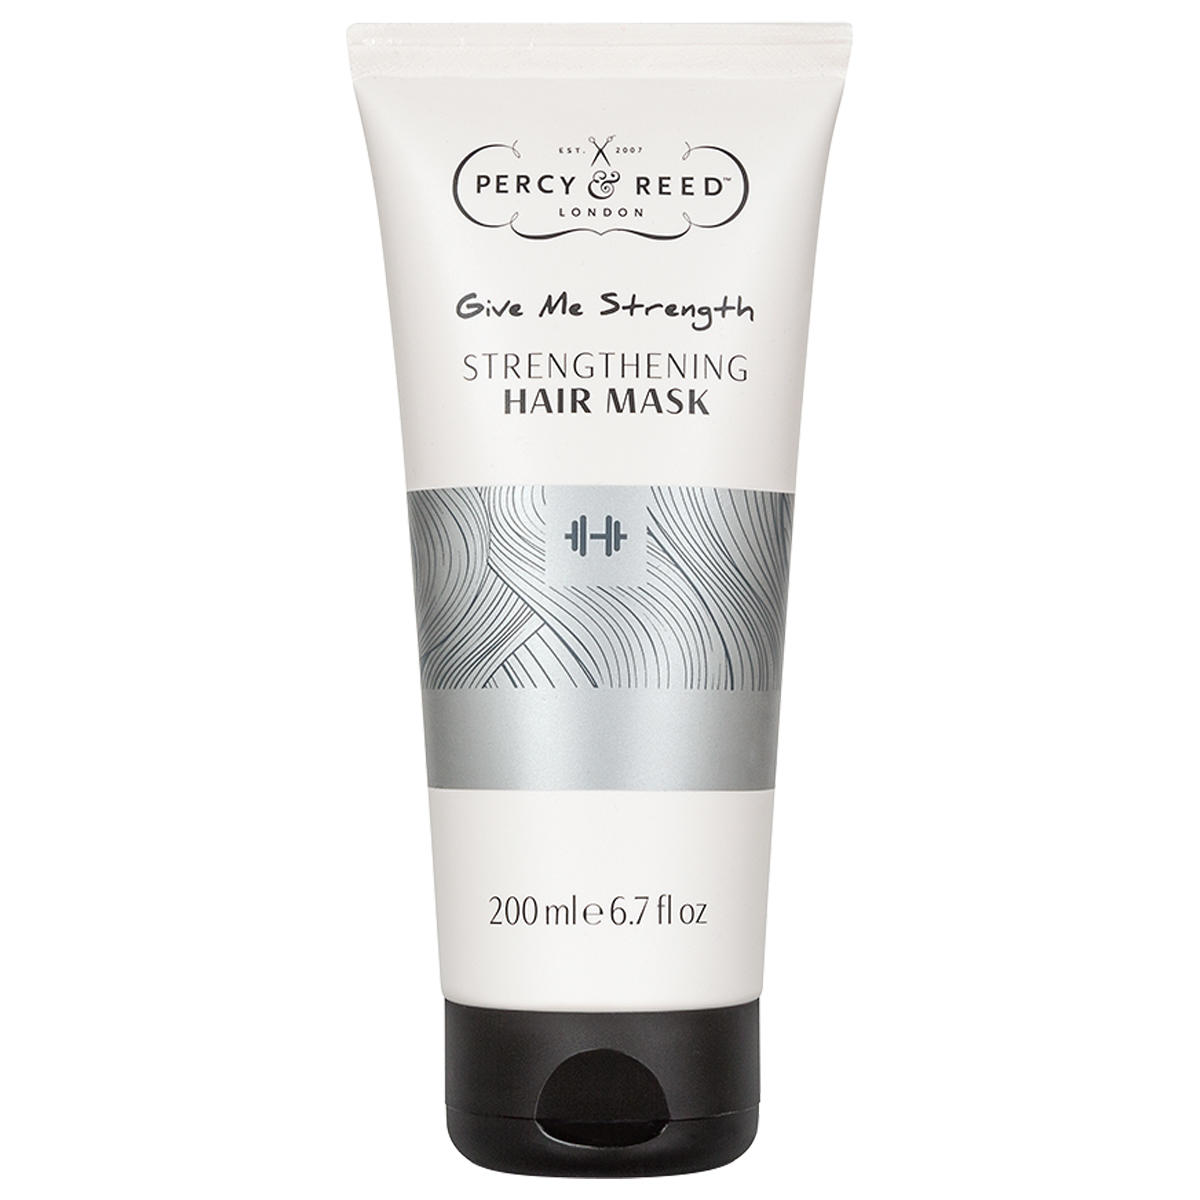 Percy & Reed Give Me Strength Strengthening Hair Mask 200 ml - 1